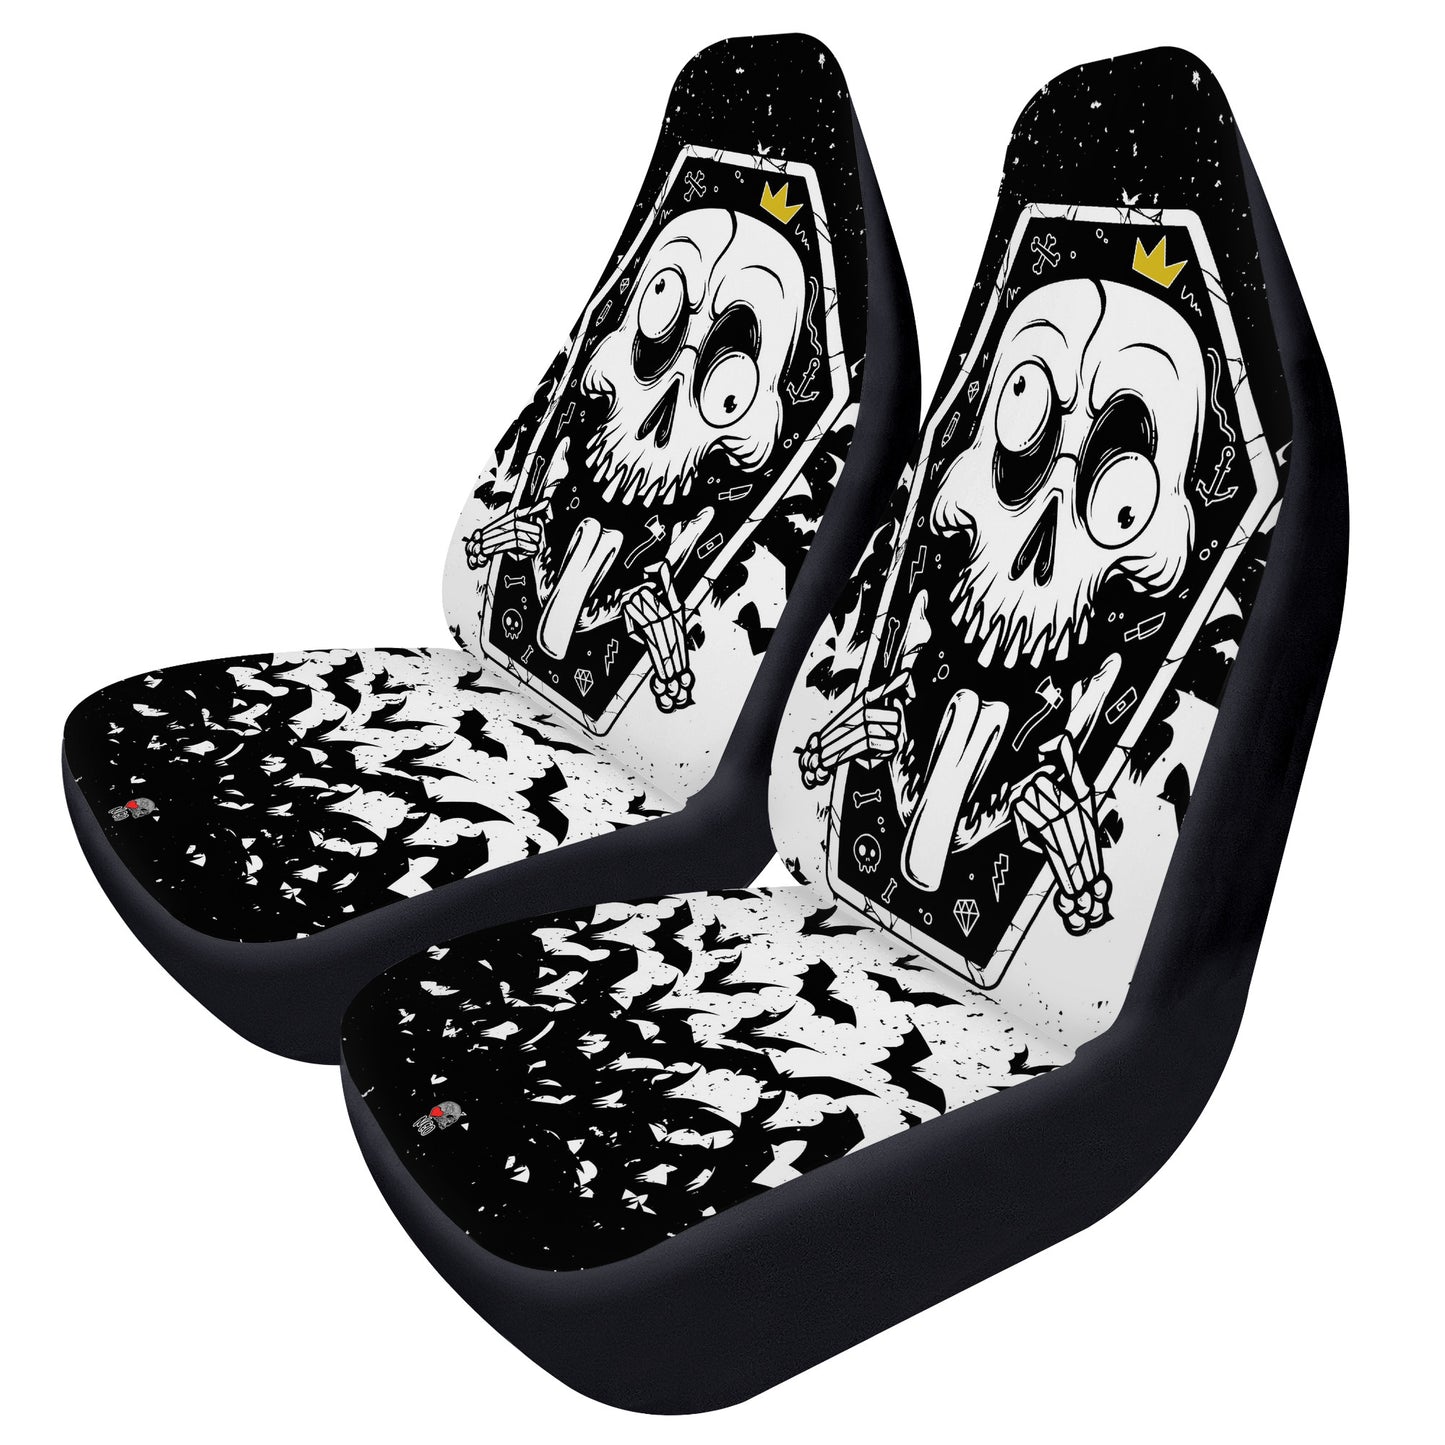 King of mess Car Seat Covers